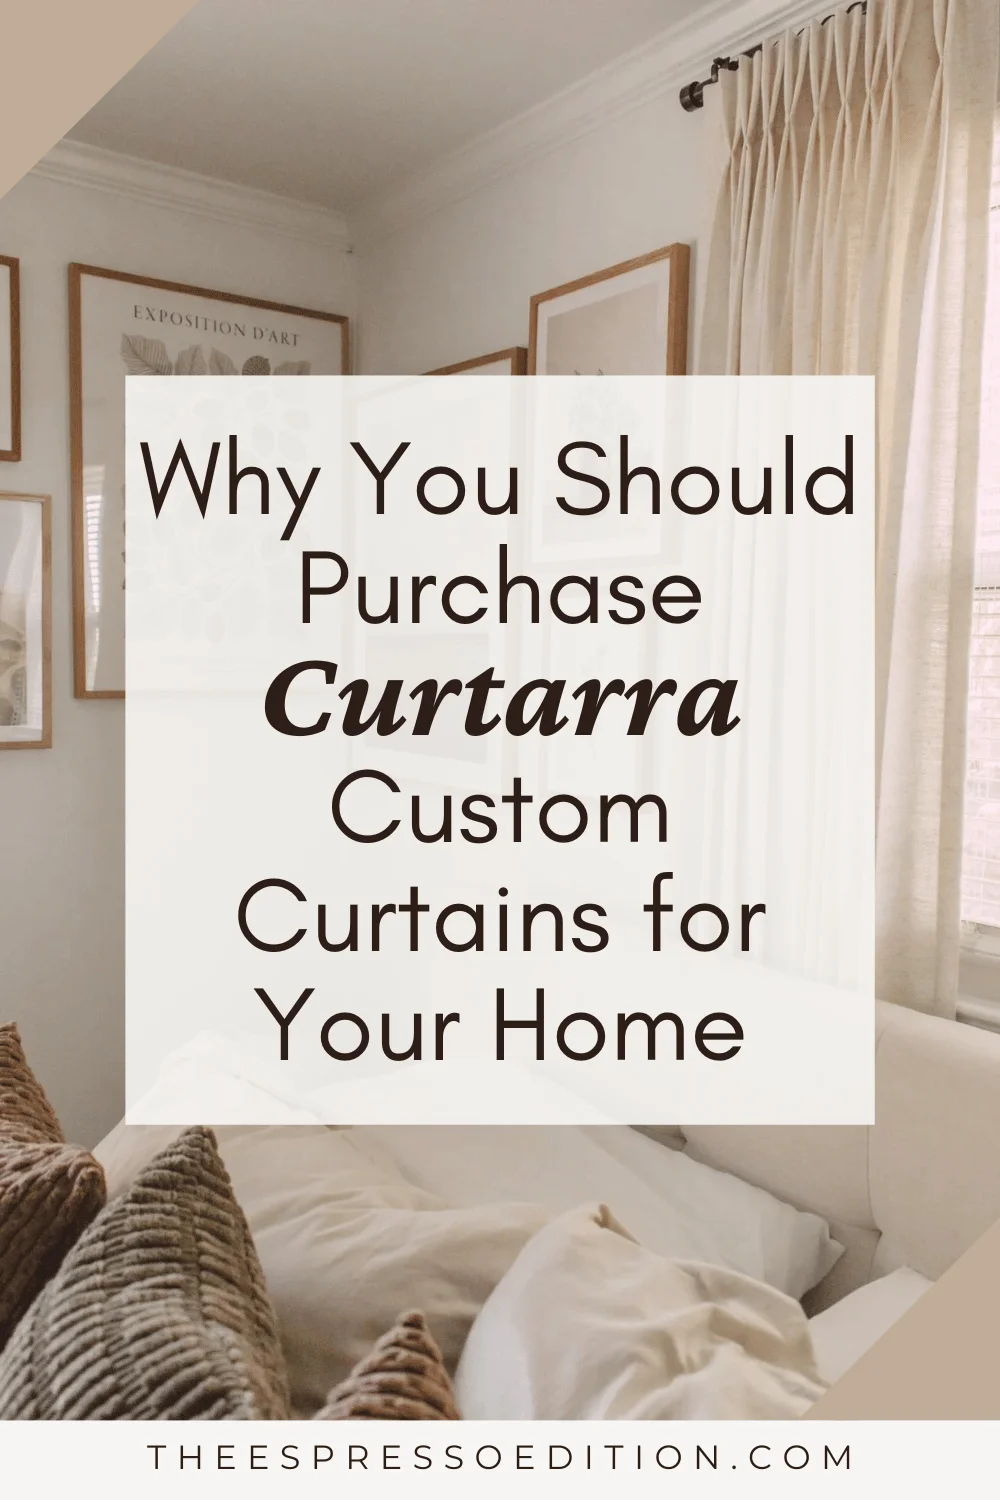 Why You Should Purchase Curtarra Custom Curtains for Your Home by The Espresso Edition cozy lifestyle blog